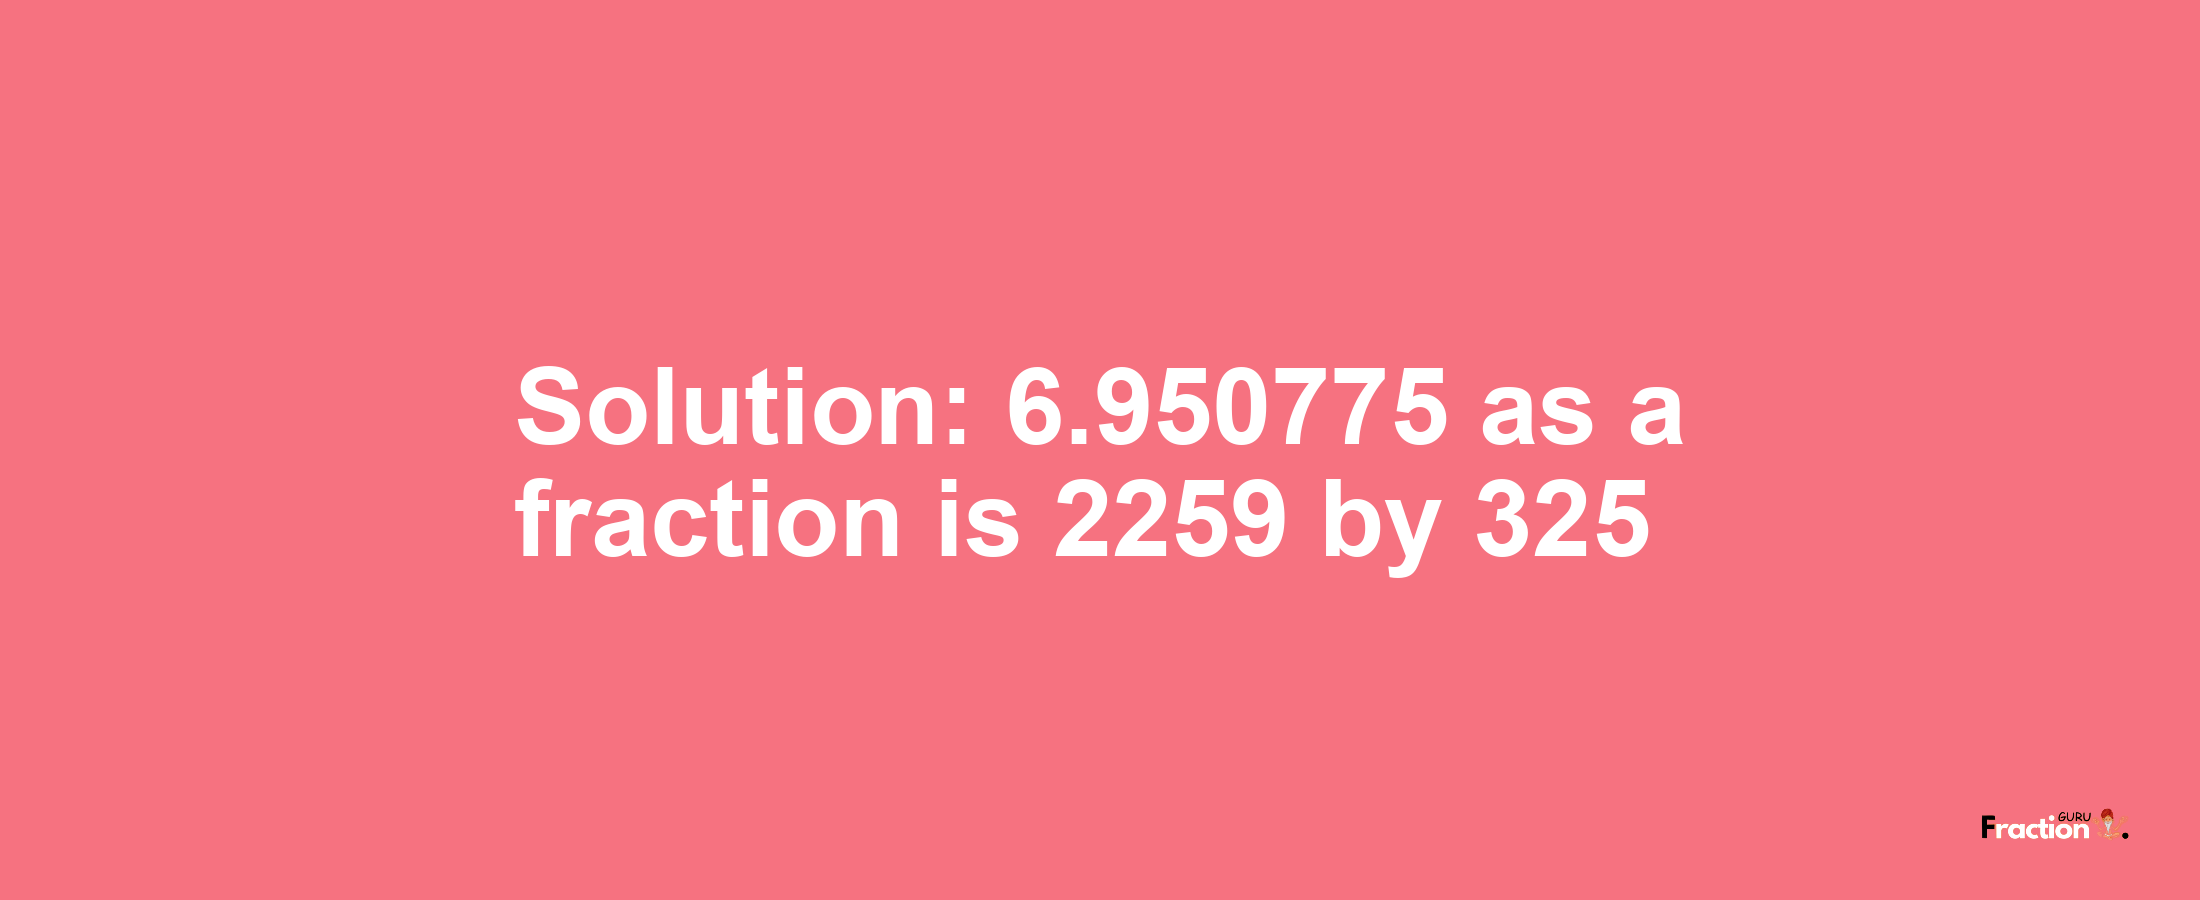 Solution:6.950775 as a fraction is 2259/325